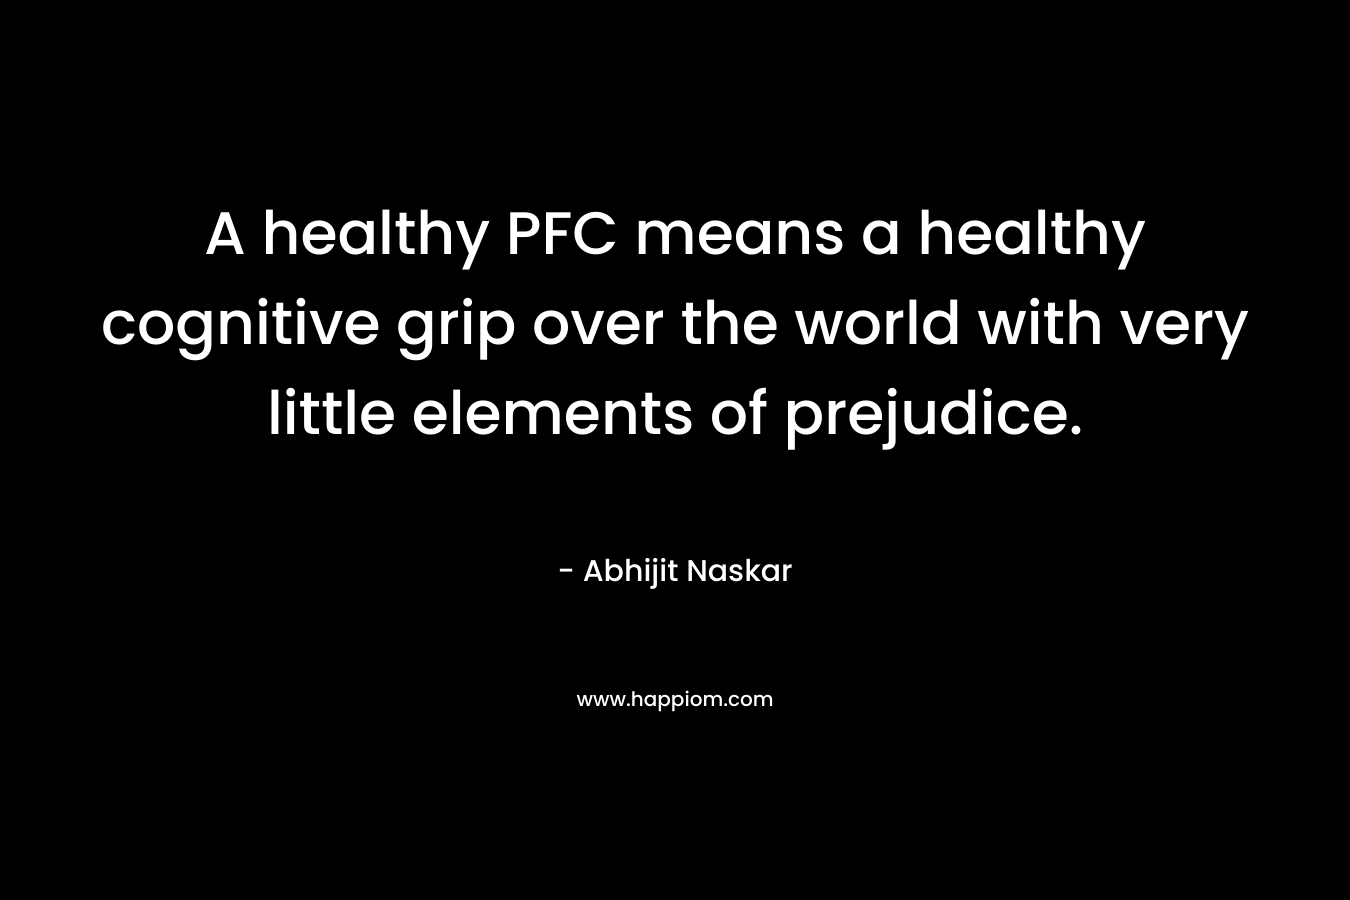 A healthy PFC means a healthy cognitive grip over the world with very little elements of prejudice. – Abhijit Naskar